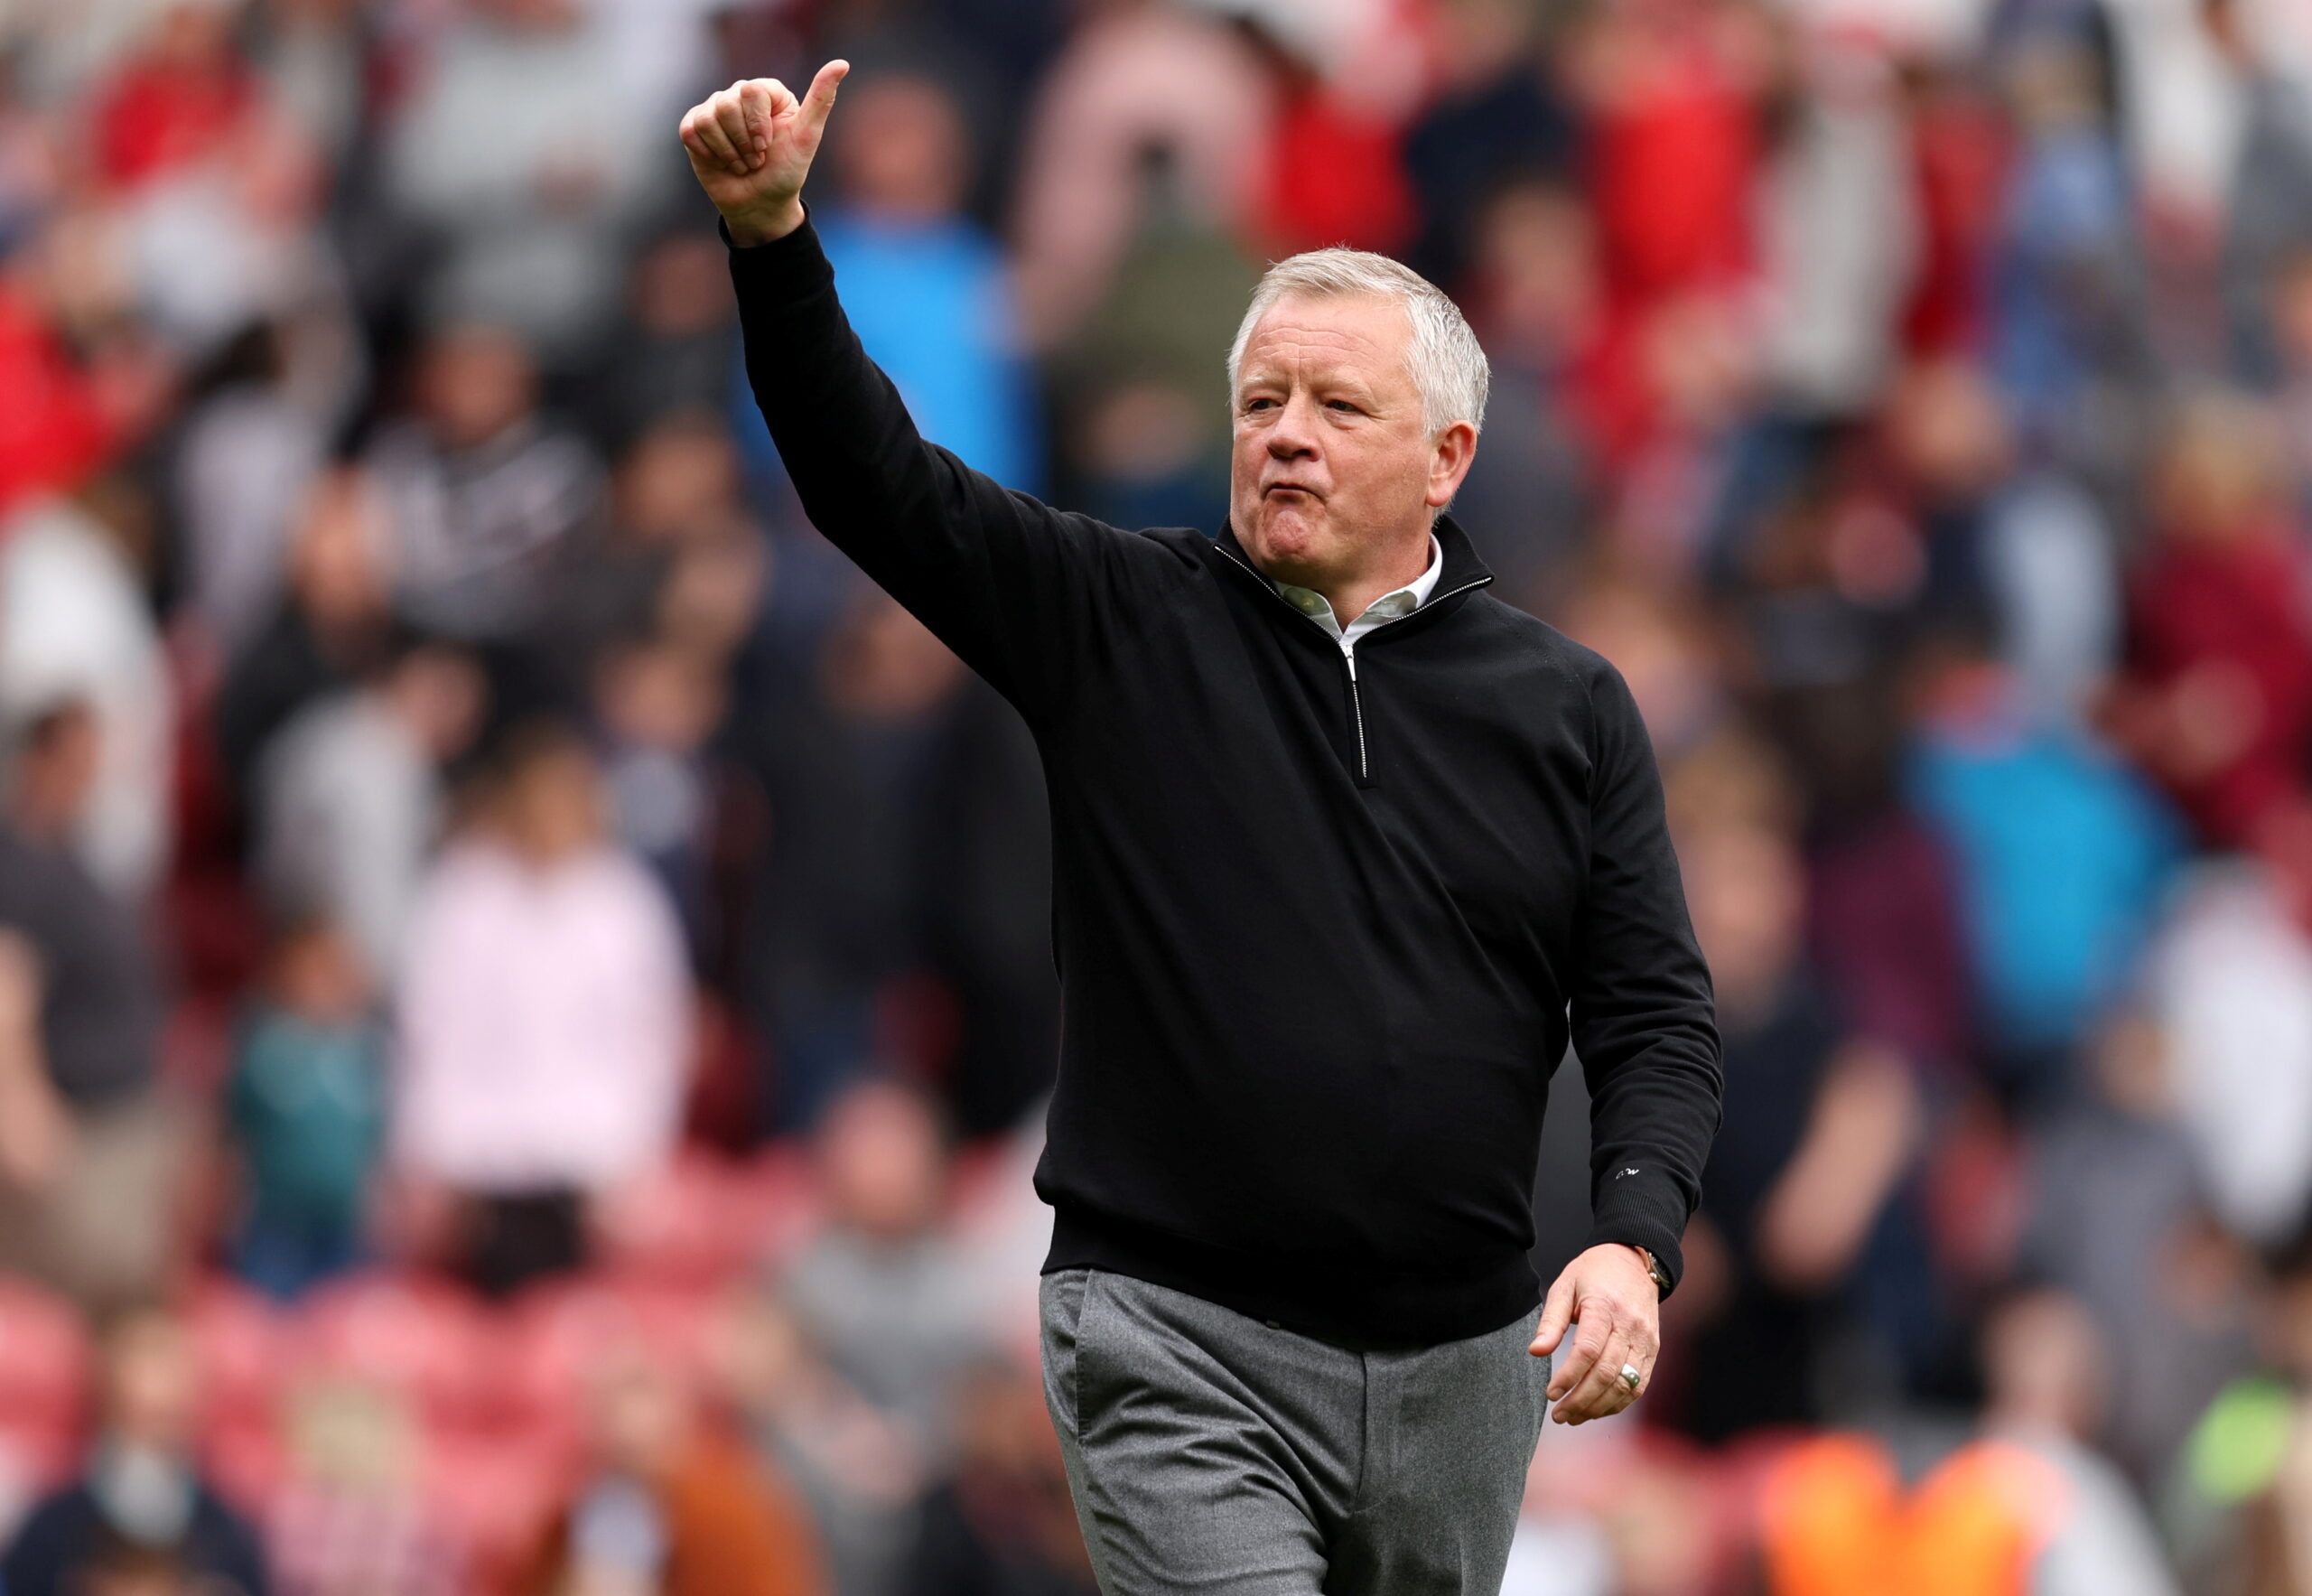 Soccer Football - Championship - Middlesbrough v Stoke City - Riverside Stadium, Middlesbrough, Britain - April 30, 2022 Middlesbrough's manager Chris Wilder acknowledges fans during a lap of appreciation after the match   Action Images/John Clifton  EDITORIAL USE ONLY. No use with unauthorized audio, video, data, fixture lists, club/league logos or 